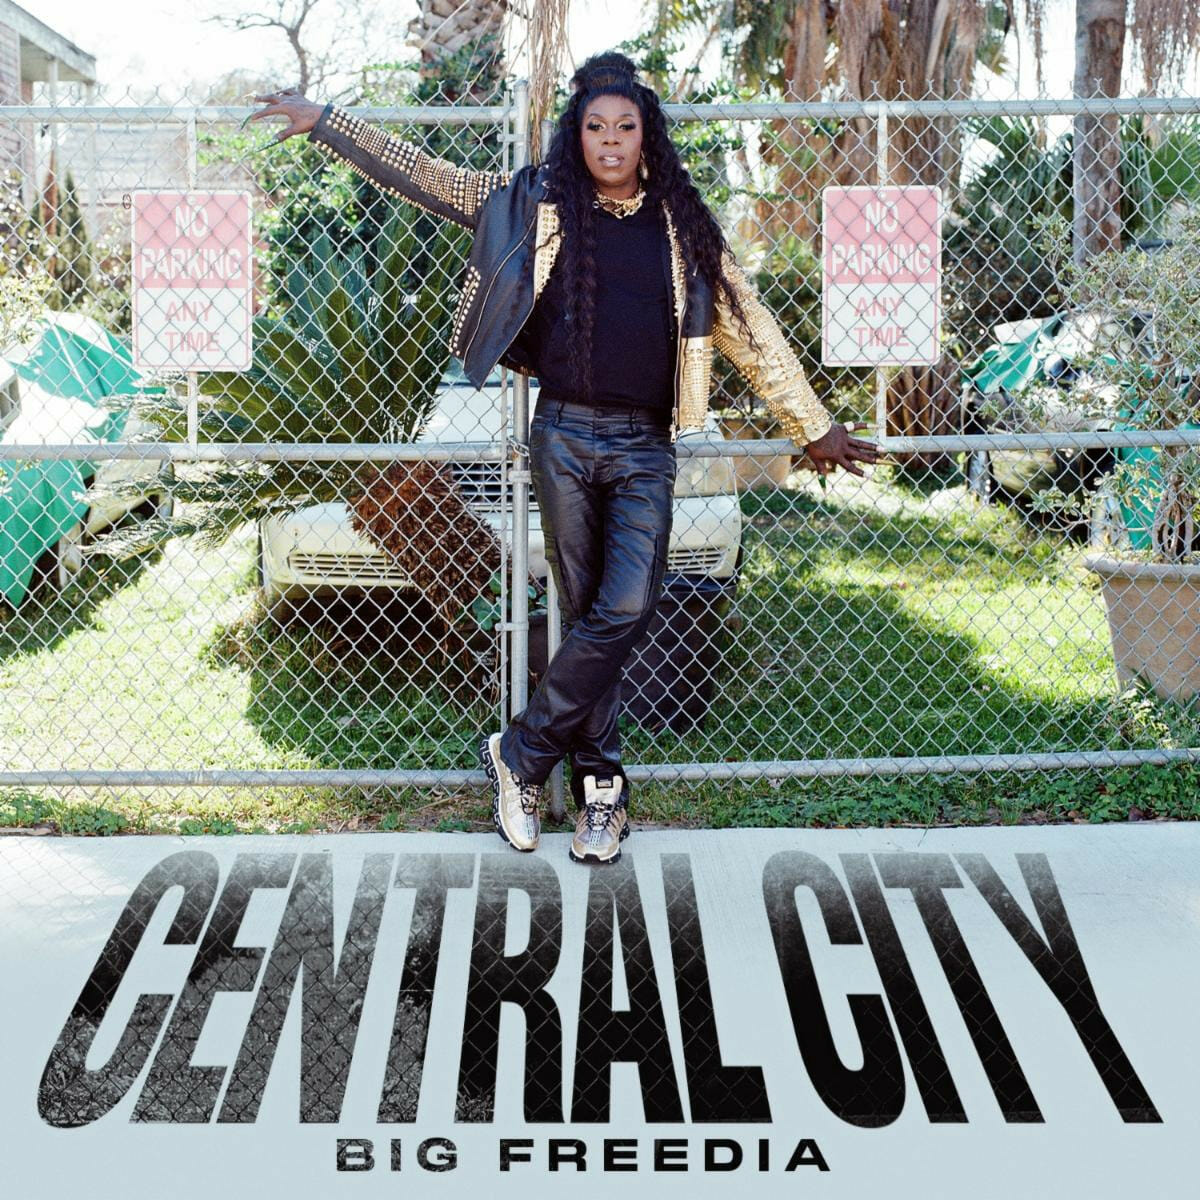 Listen Now: Big Freedia Drops New Single “Bigfoot” Off Forthcoming LP ‘Central City’